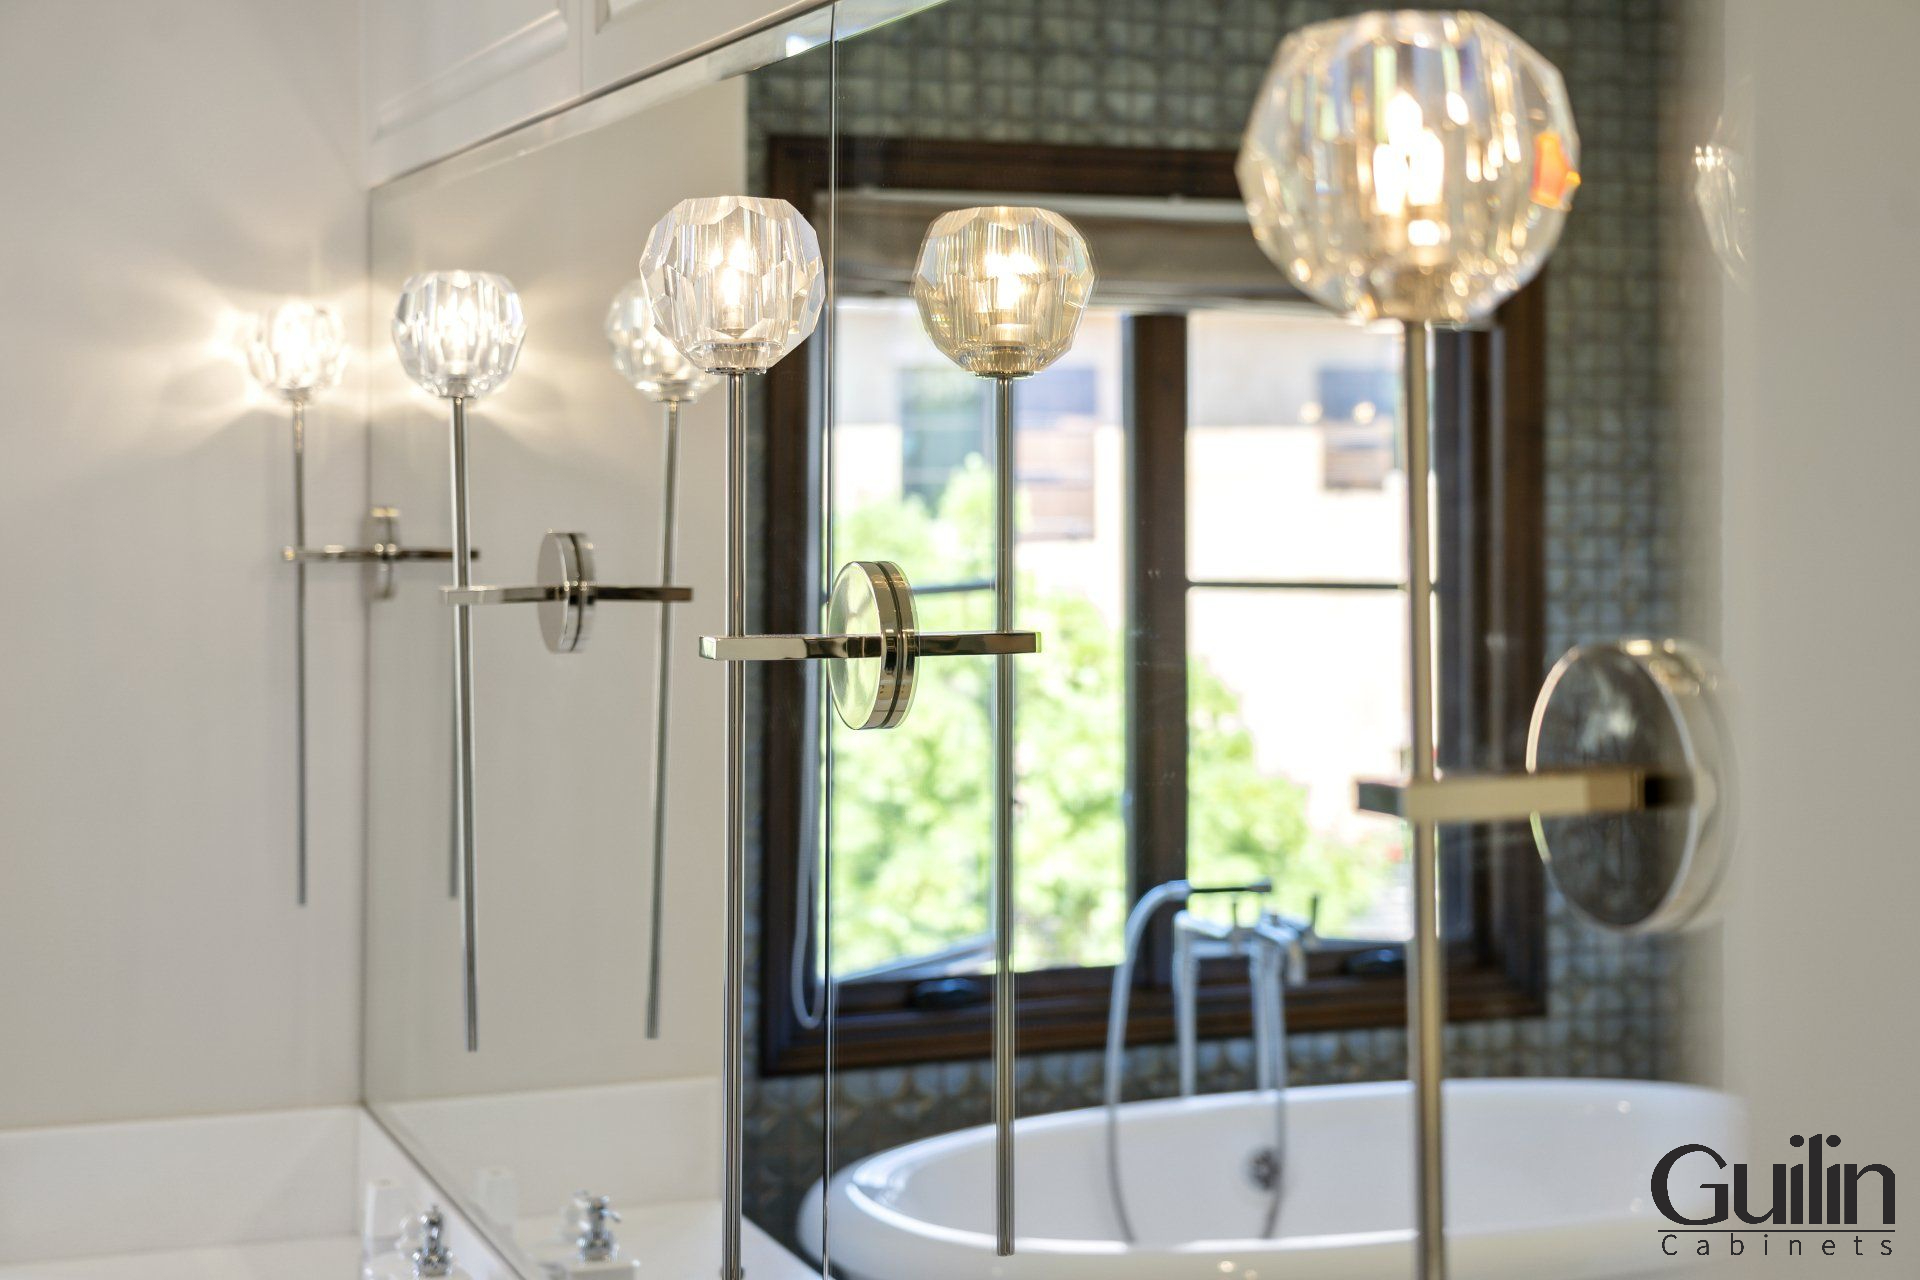 A mirror is an essential item because your guest will need it to do basic grooming and makeup.